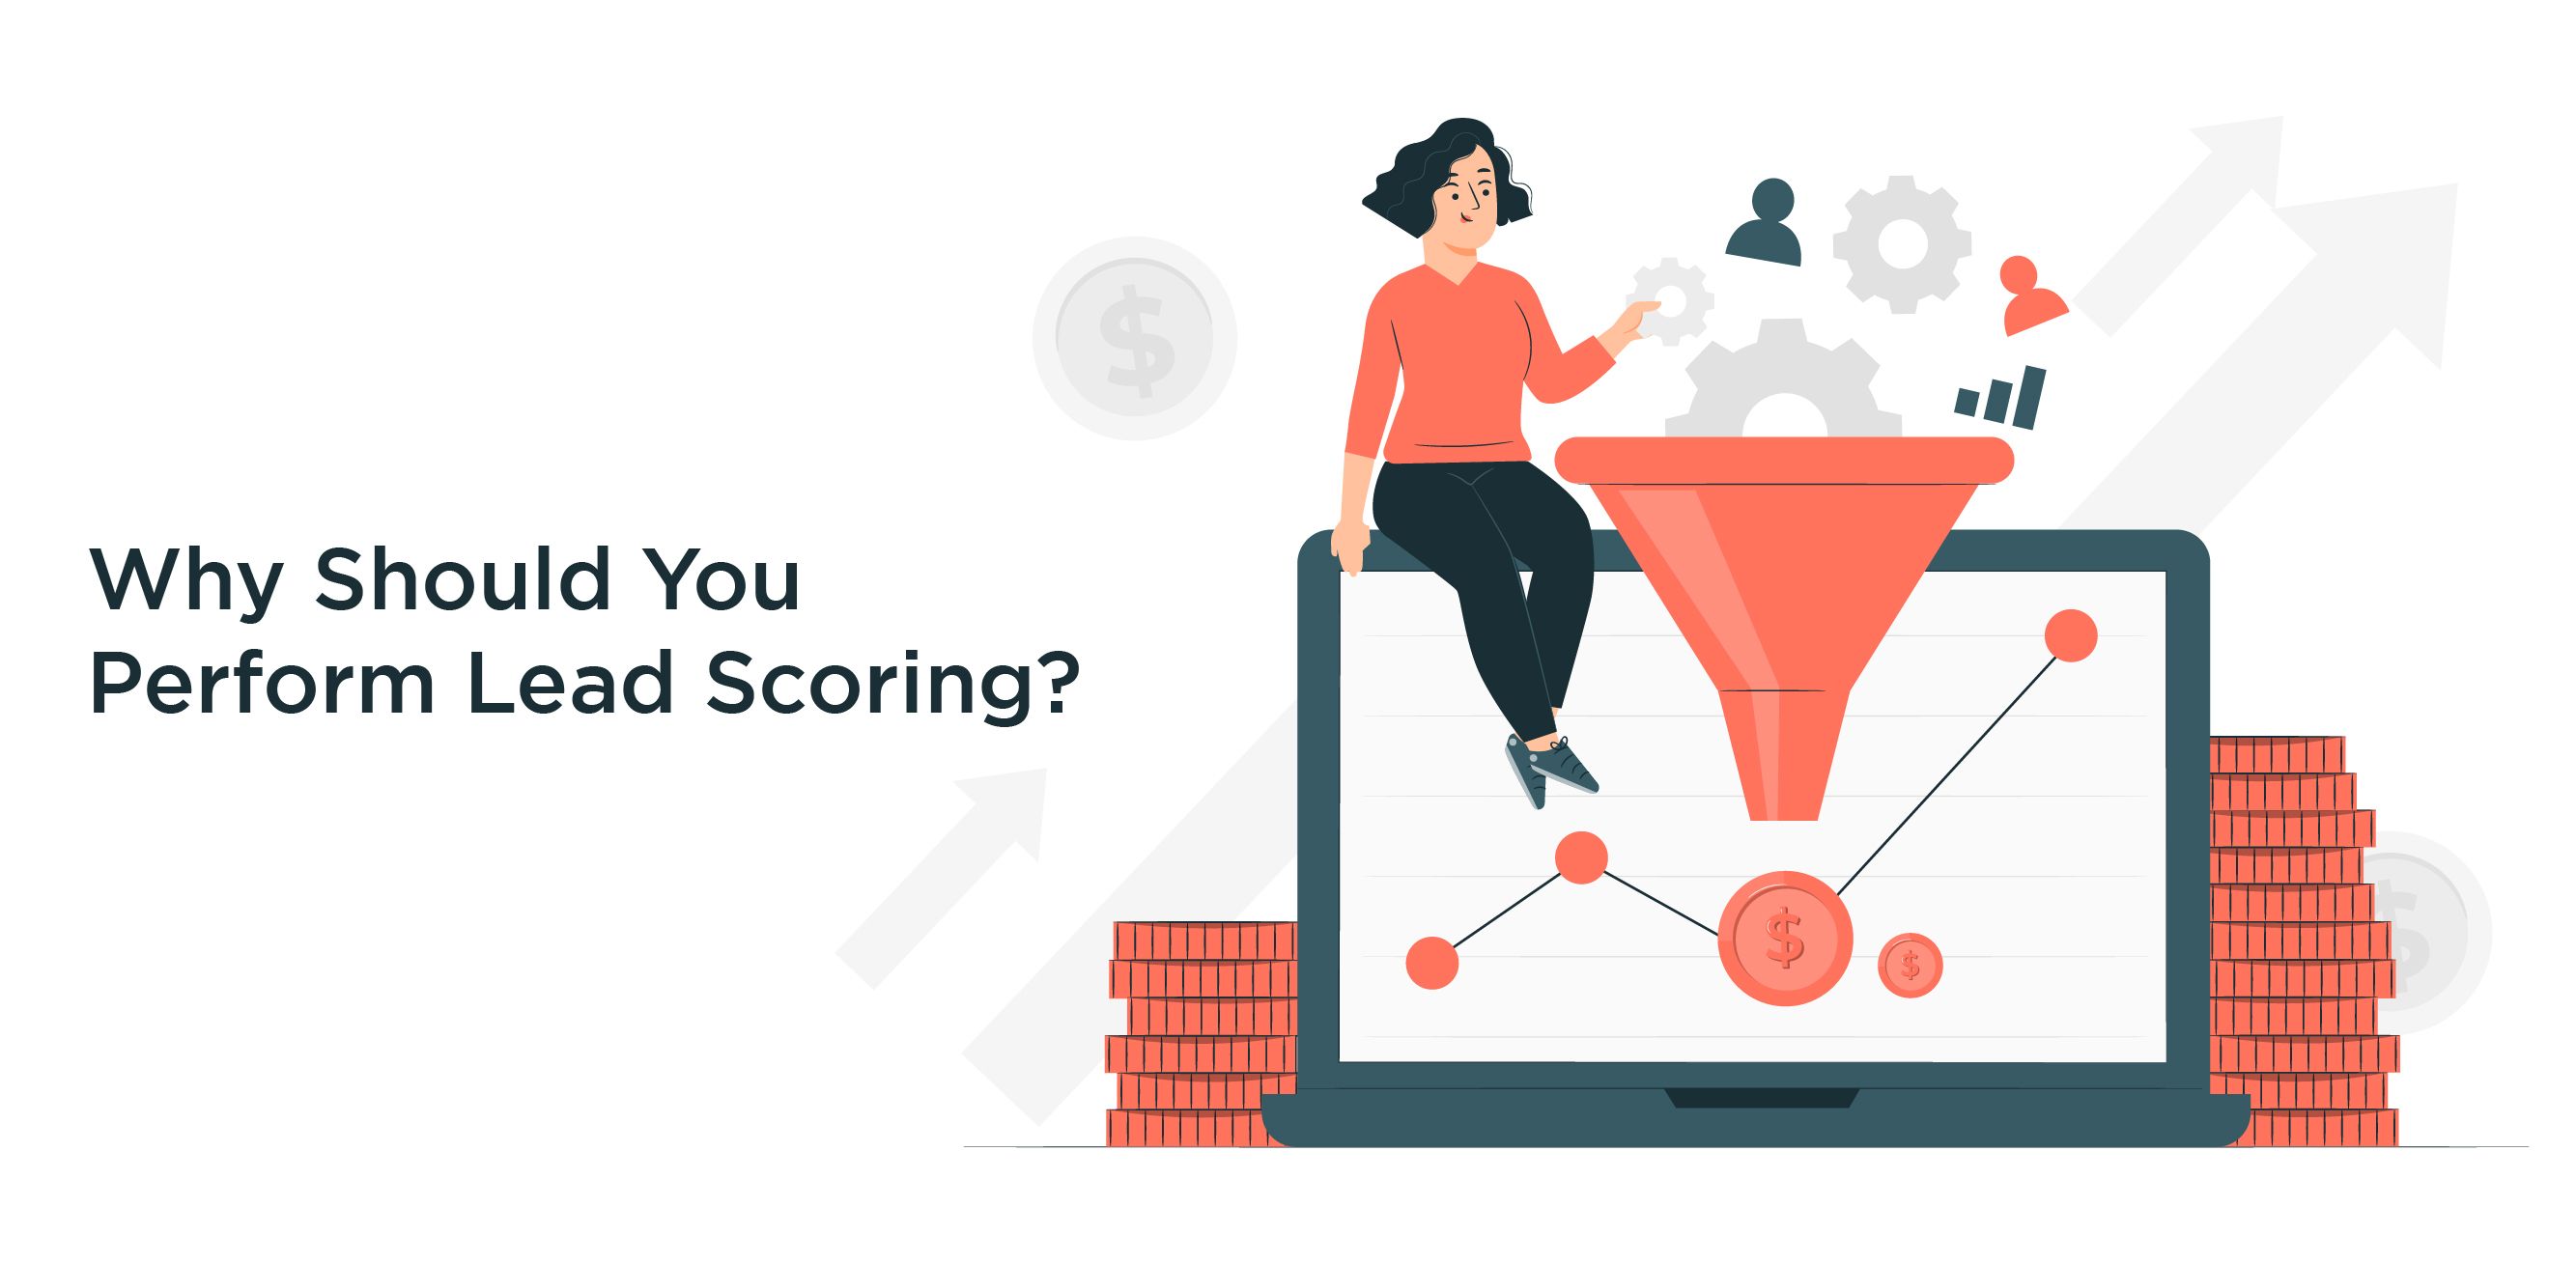  Why Should You Perform Lead Scoring?